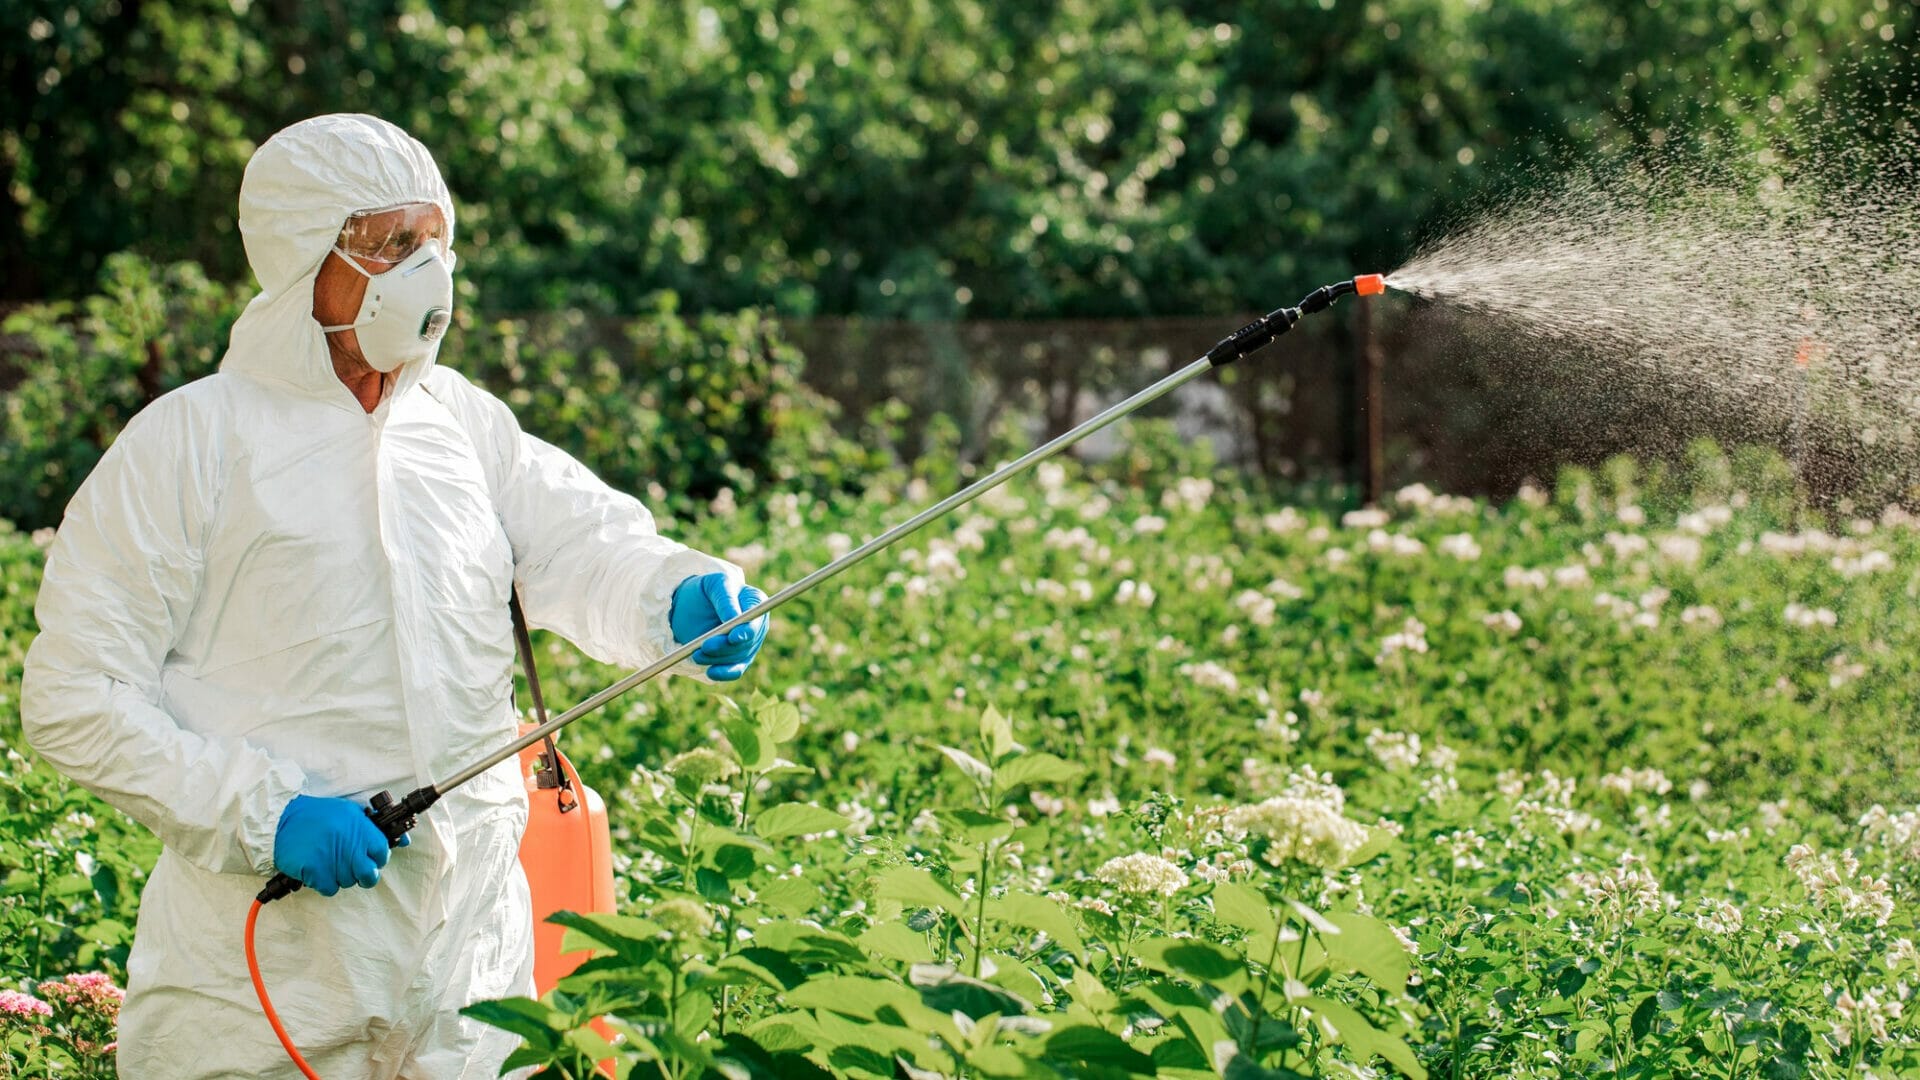 Precaution for Harmful Effects of Pesticides